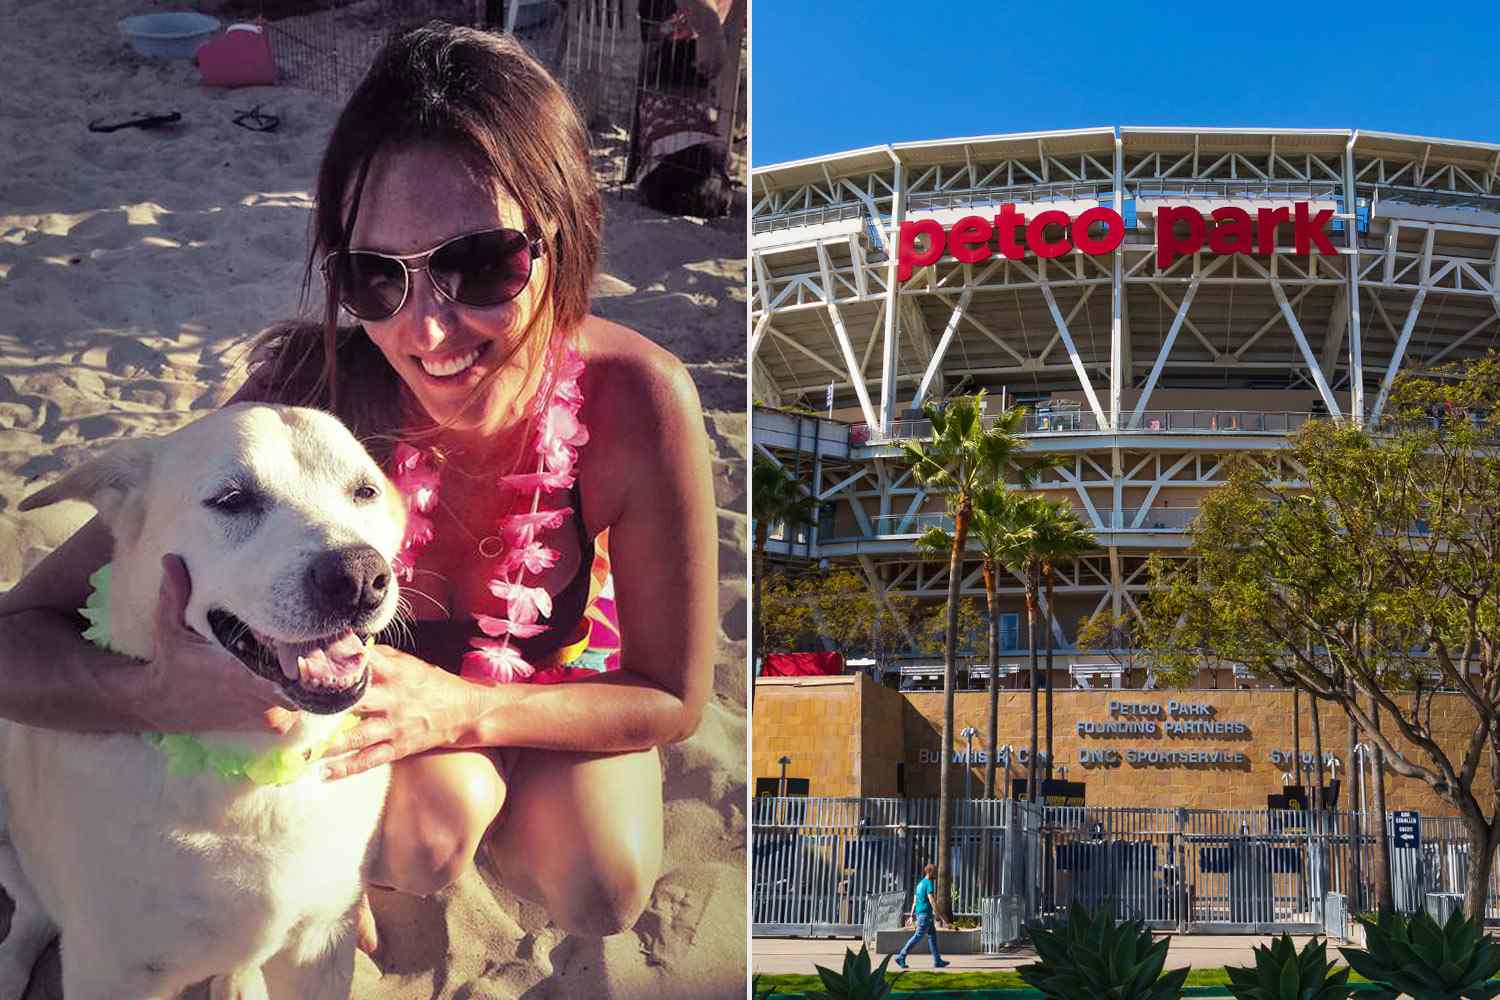 Police Rule That Woman and Son's Fatal Plunge at San Diego Stadium Was a Murder-Suicide